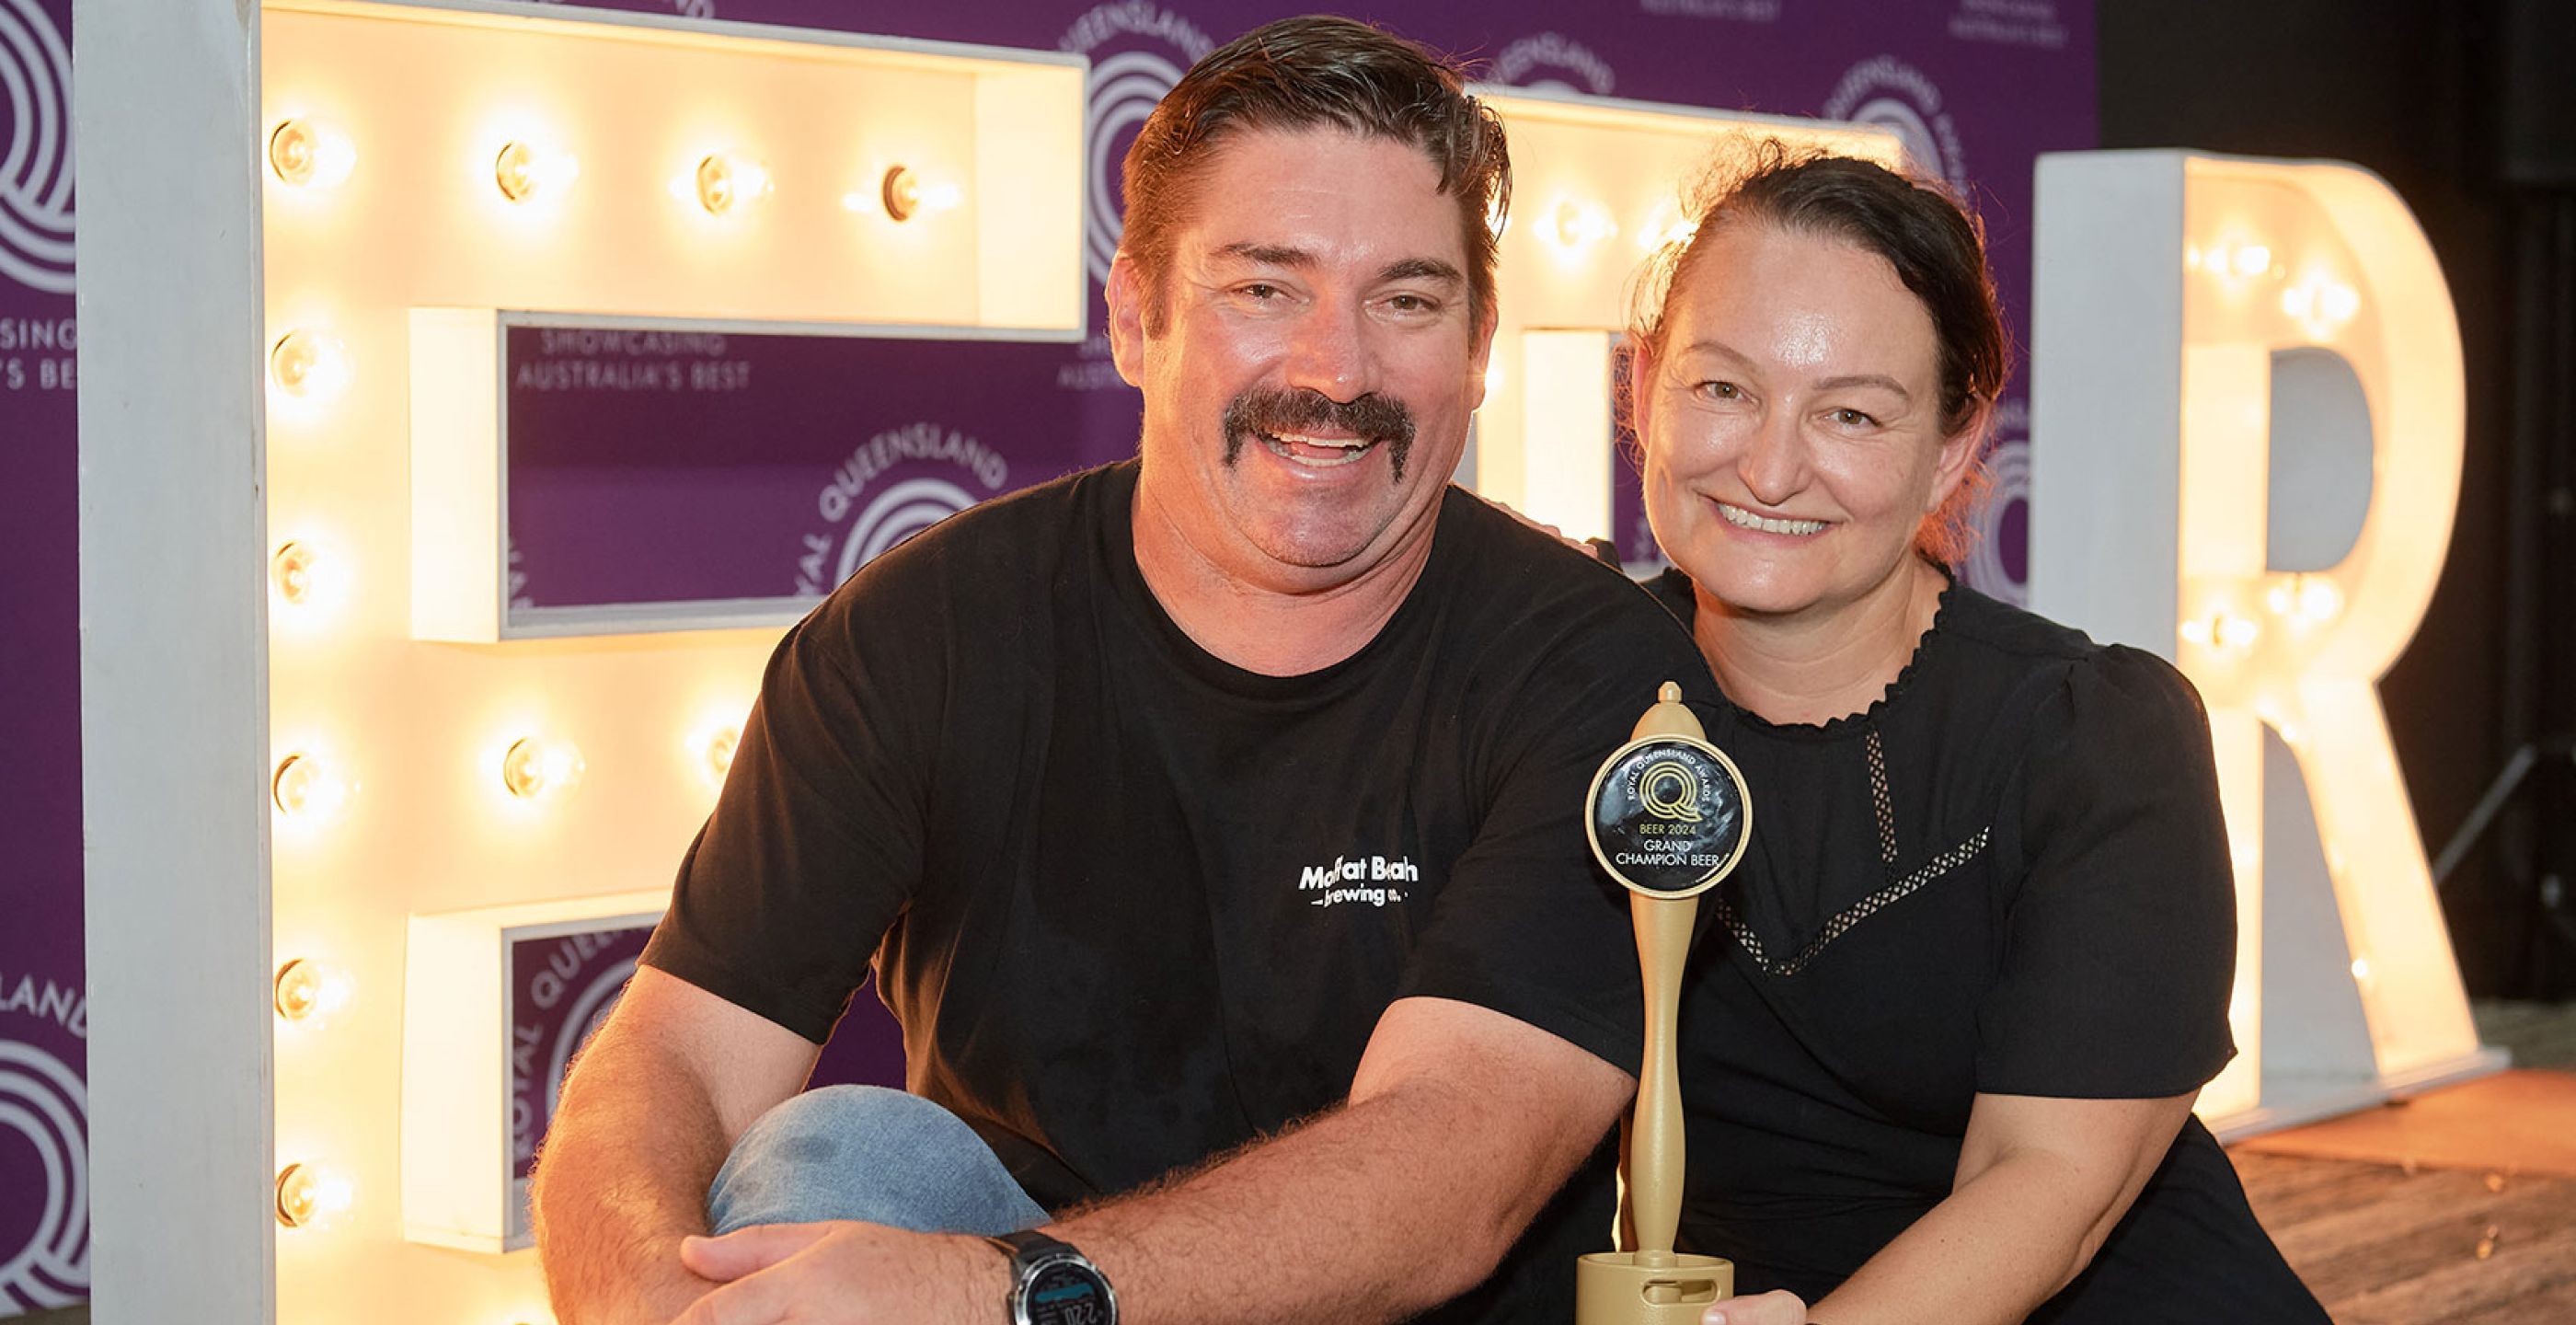 Moffat Beach Top The Royal Queensland Beer Awards Once Again